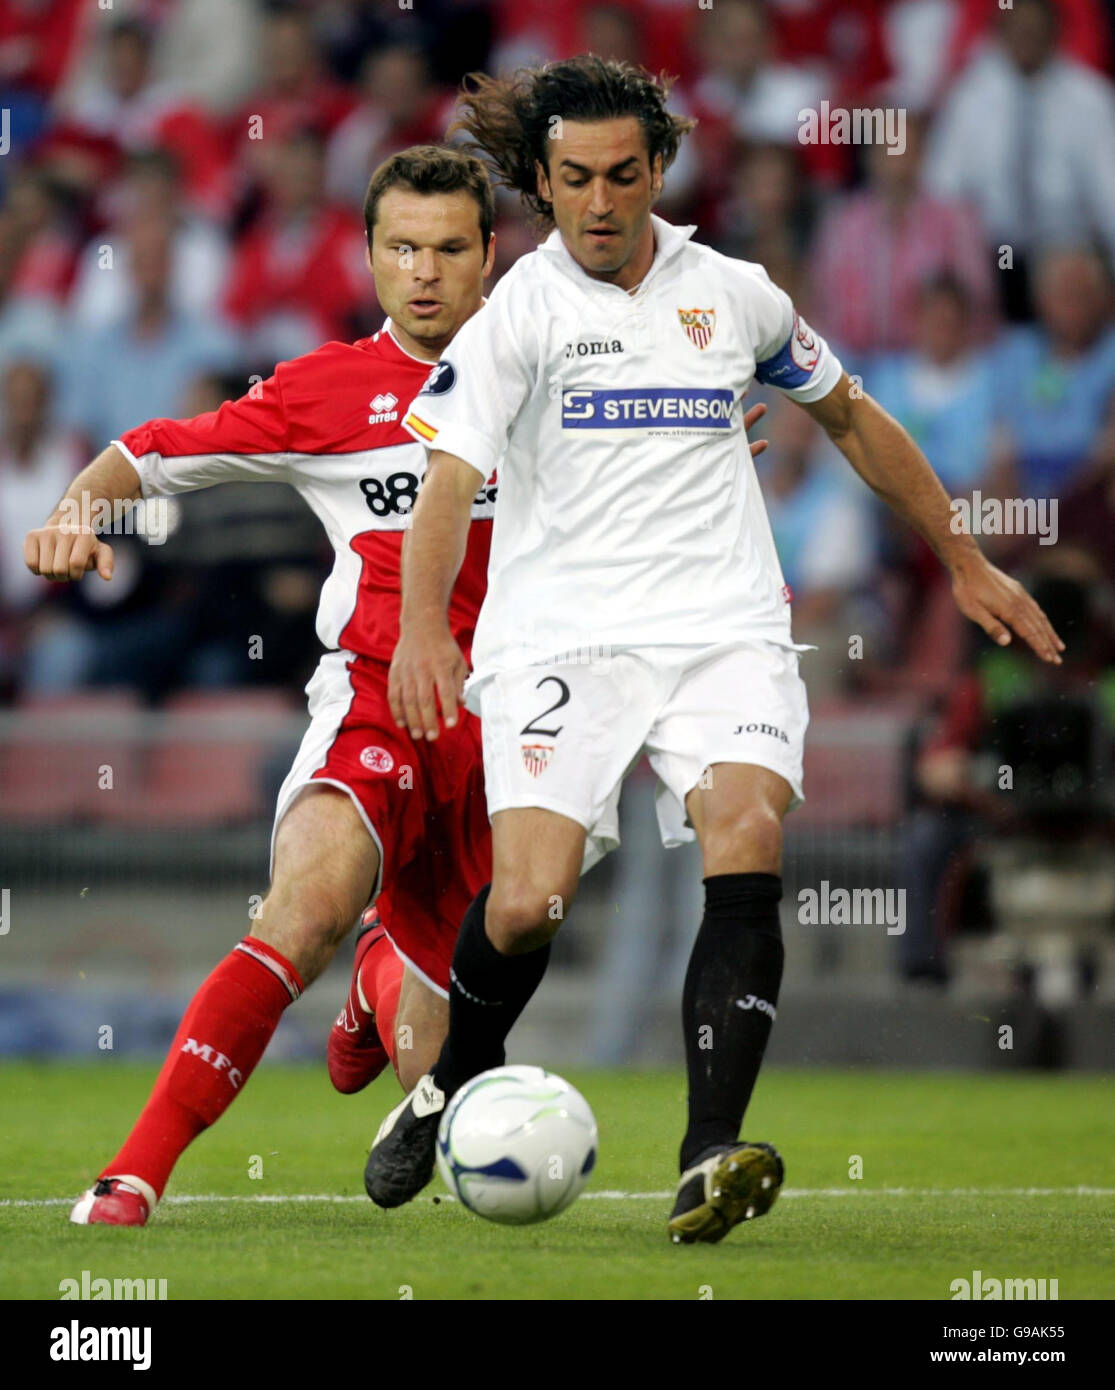 Sevilla's Javi Navarro shields the ball from Middlesbrough's Mark Viduka during the UEFA Cup Final at PSV Stadion, Eindhoven, Netherlands. Stock Photo